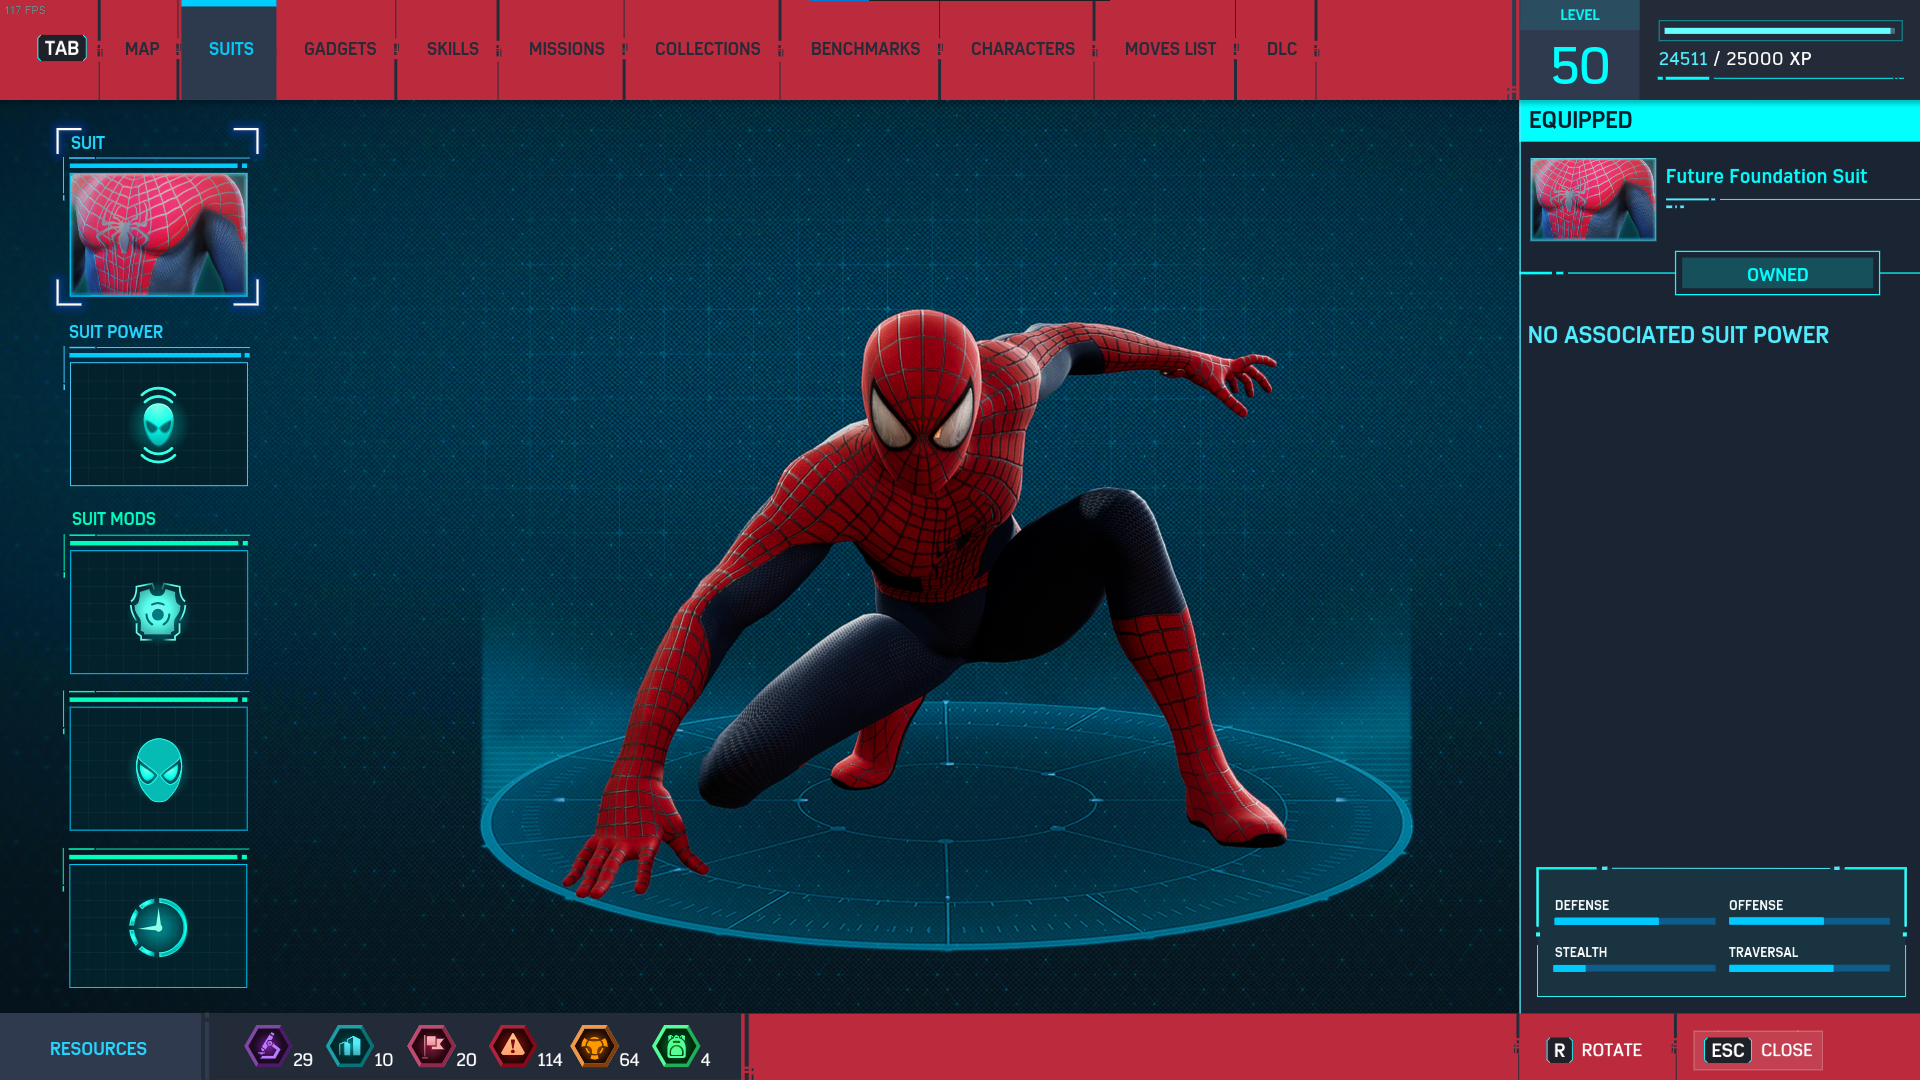 NEW (2022) How To Install Mods in Marvel's Spider-Man PC - Full TUTORIAL 